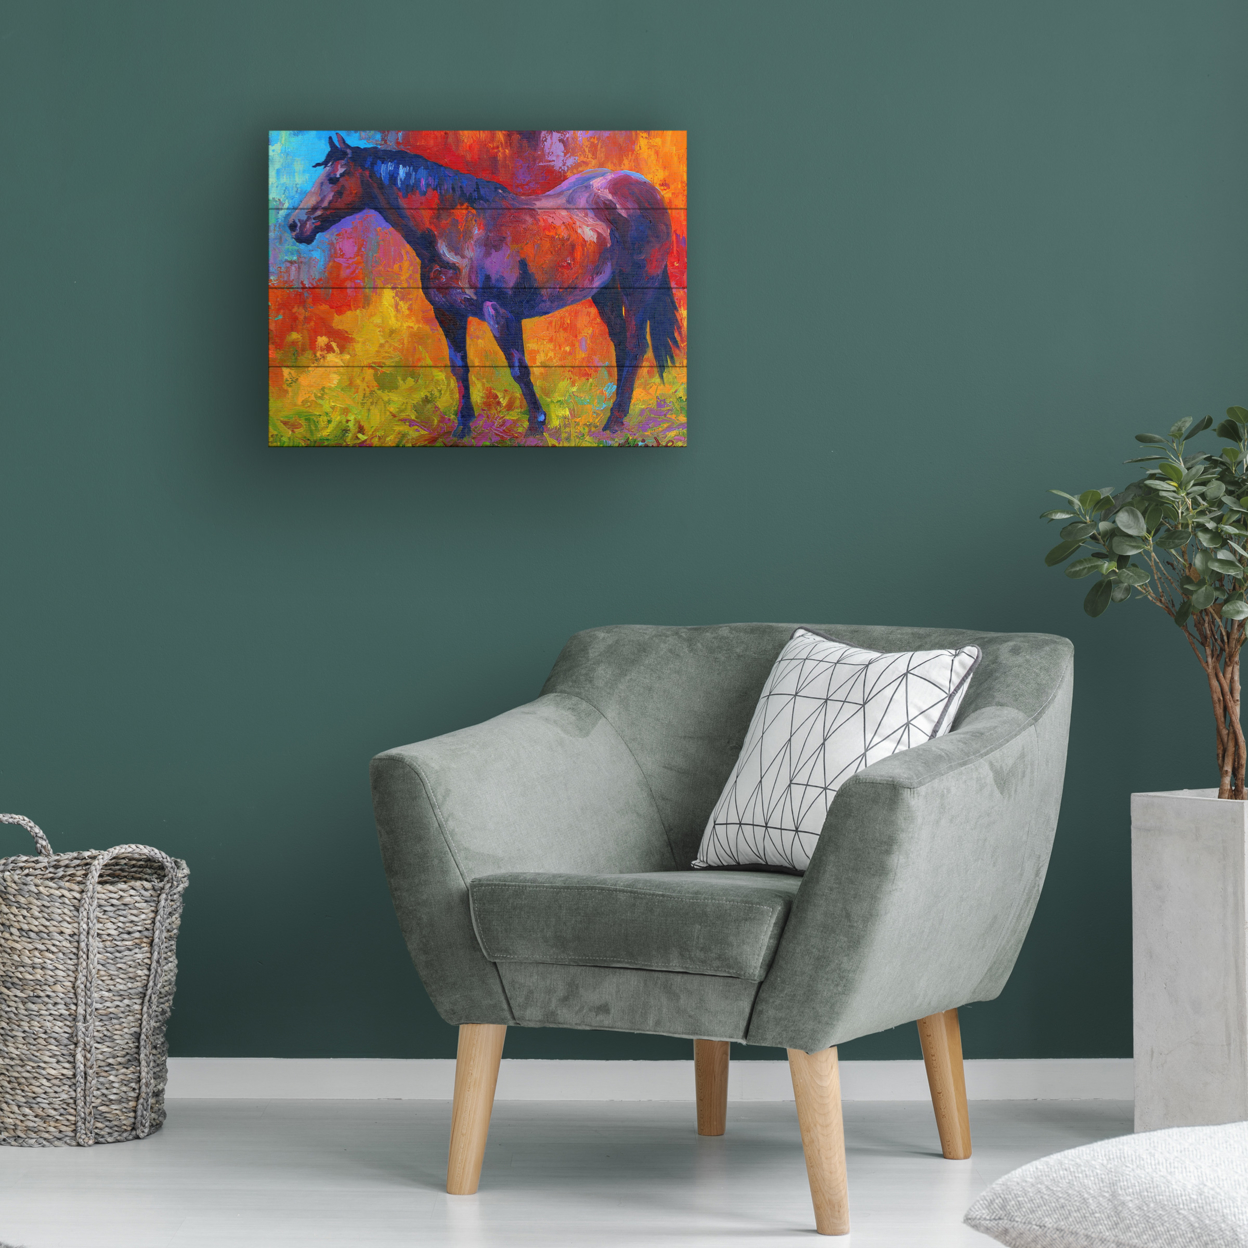 Wall Art 12 X 16 Inches Titled Bay Mare I Ready To Hang Printed On Wooden Planks